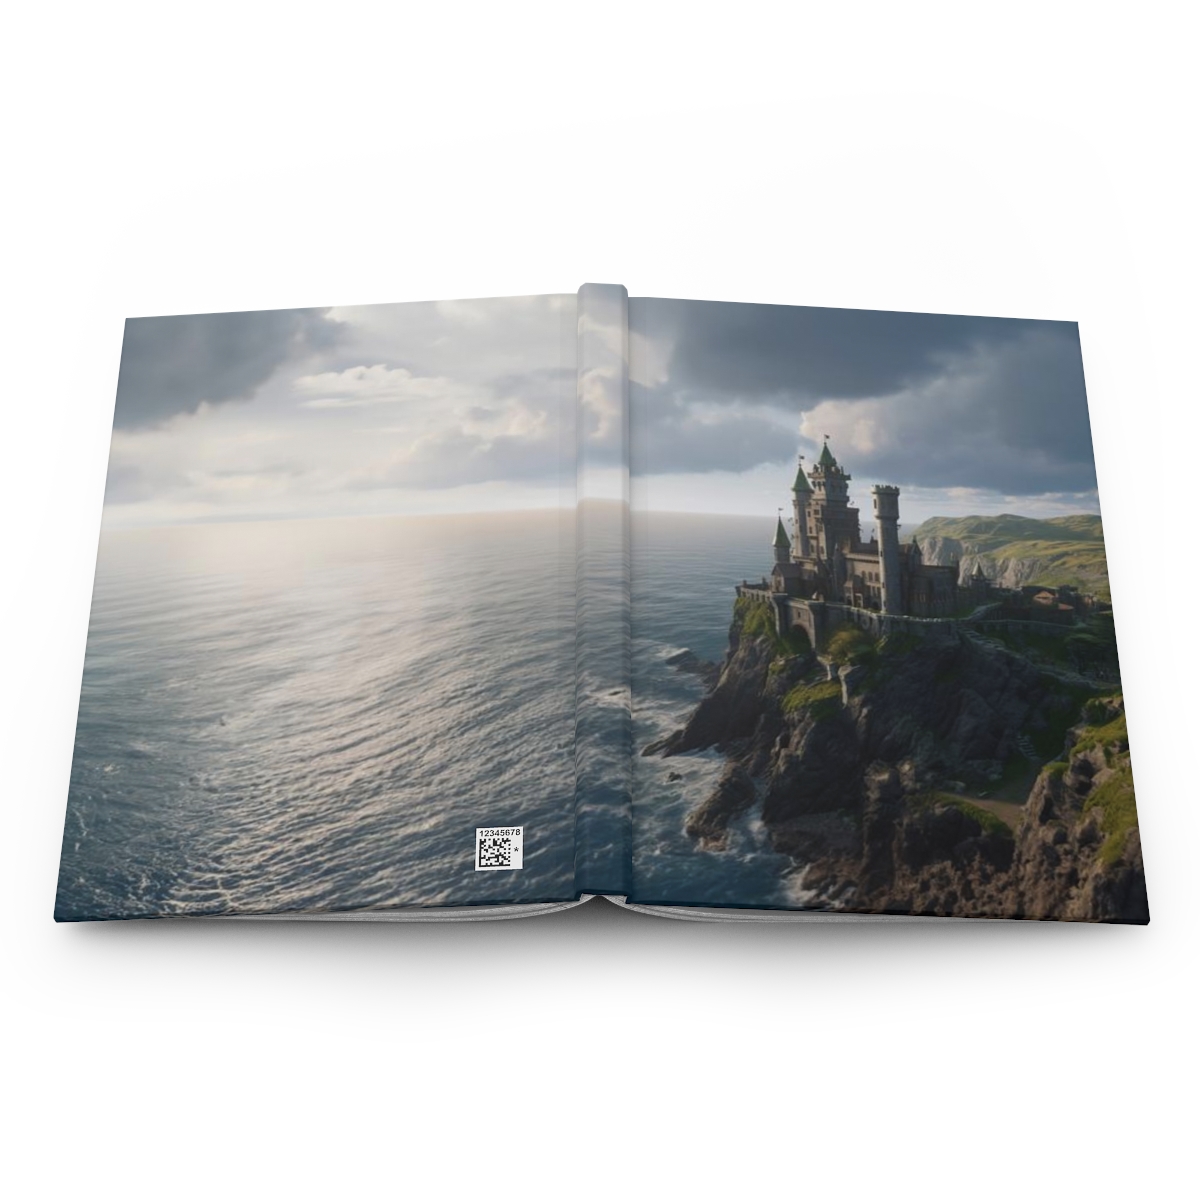 Welcome to the Kingdom of Aile - Hardcover Journal Matte product thumbnail image